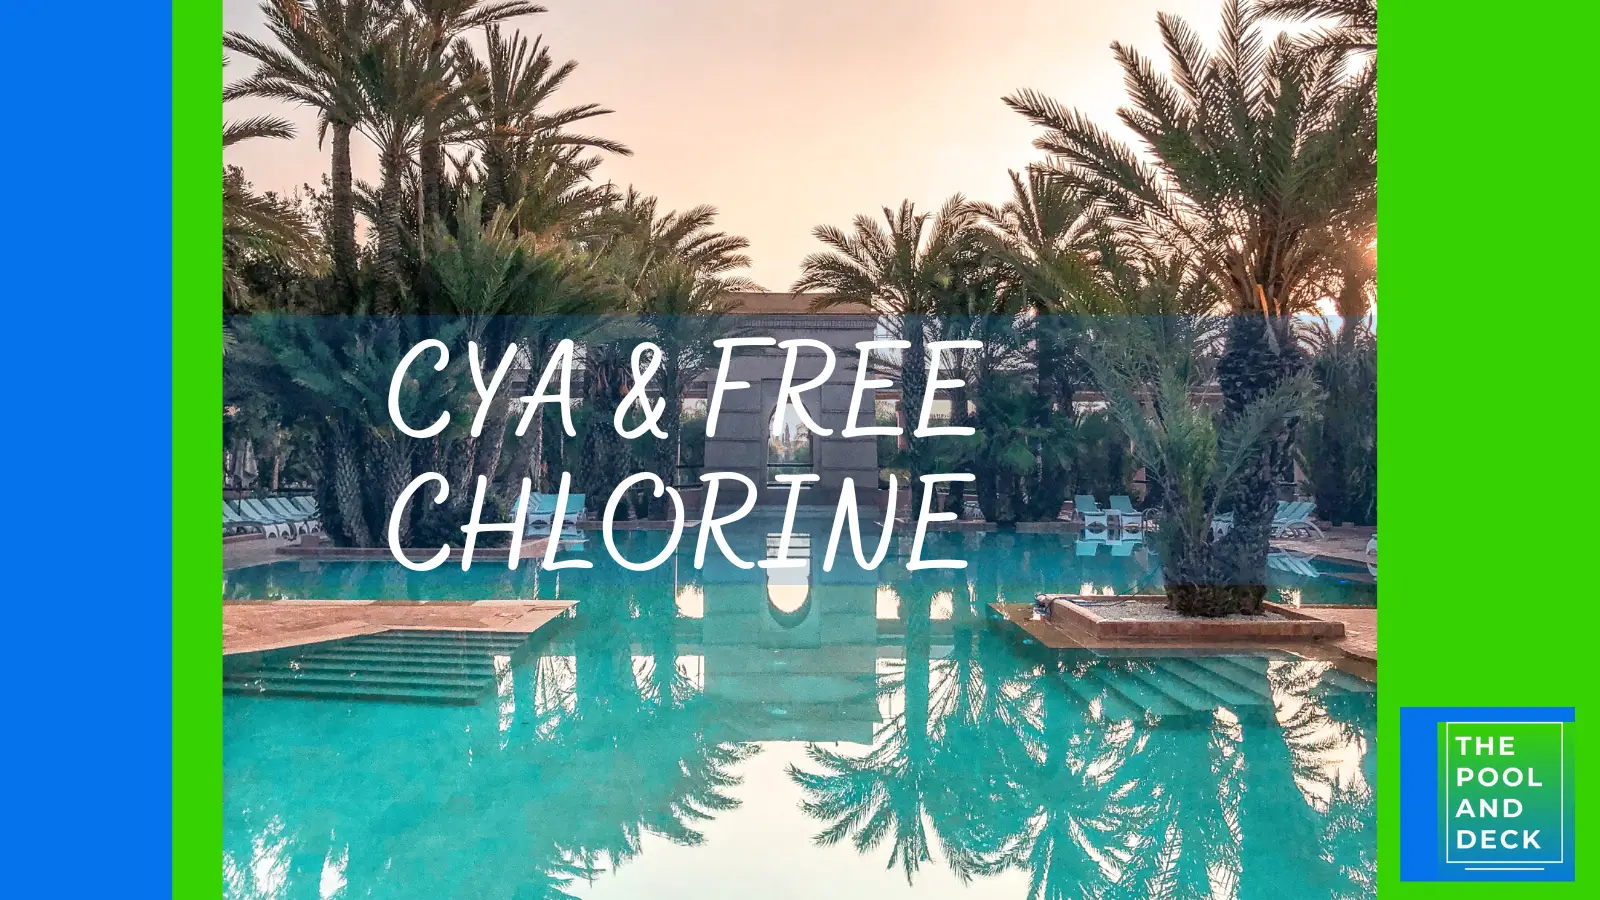 CYA And Free Chlorine: Important Stuff You Need To Know!